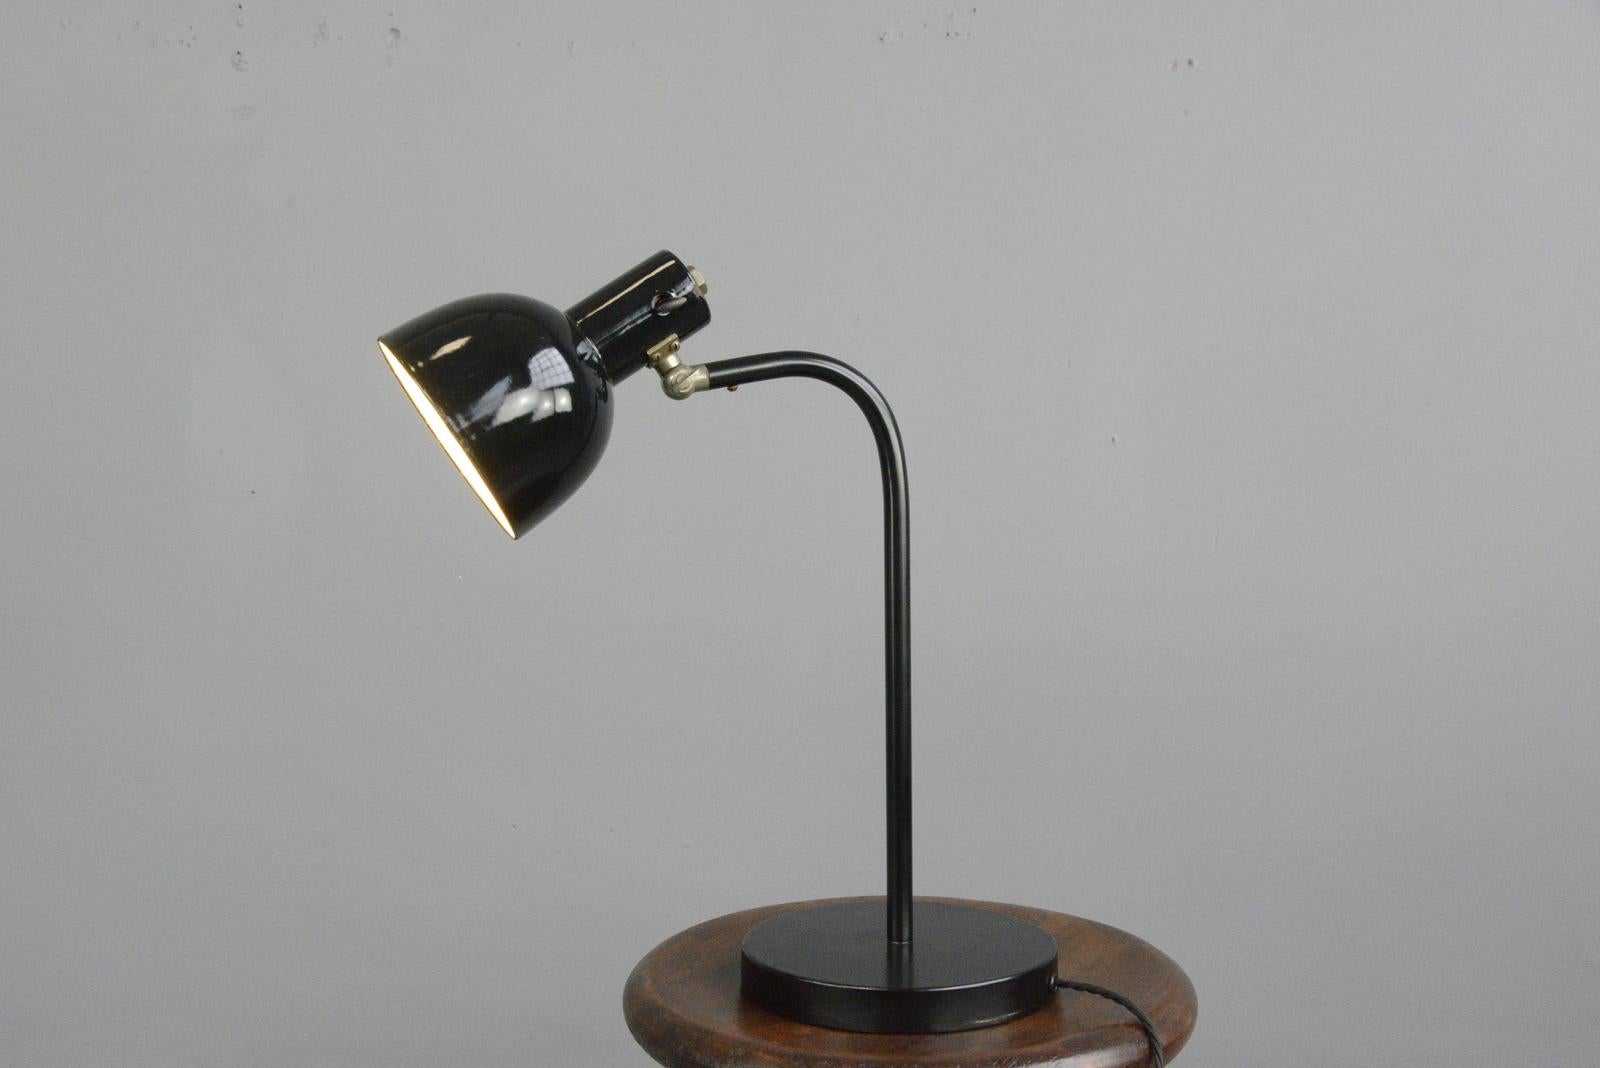 German desk lamp, circa 1930s

- Curved steel arm
- Cast iron foot
- Vitreous black enamel shade
- Takes E27 fitting bulbs
- Original toggle On/Off switch on the shade,
- German, 1930s
- Measures: 46cm tall x 36cm deep x 19cm